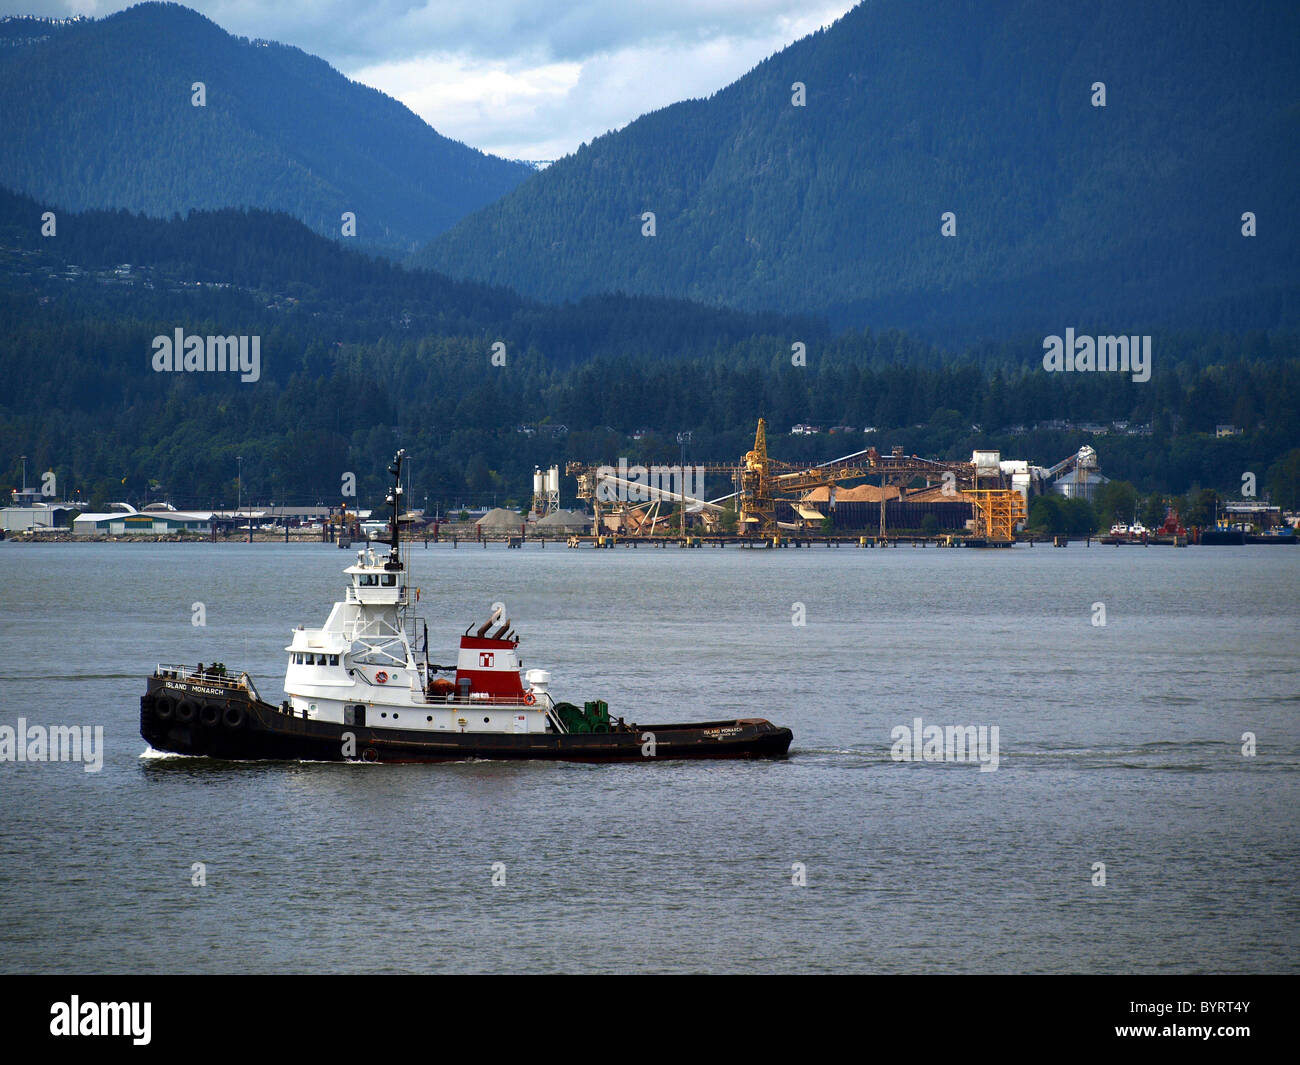 Tugboat in Vancouver Harbour taken from Canada Place. Stock Photo